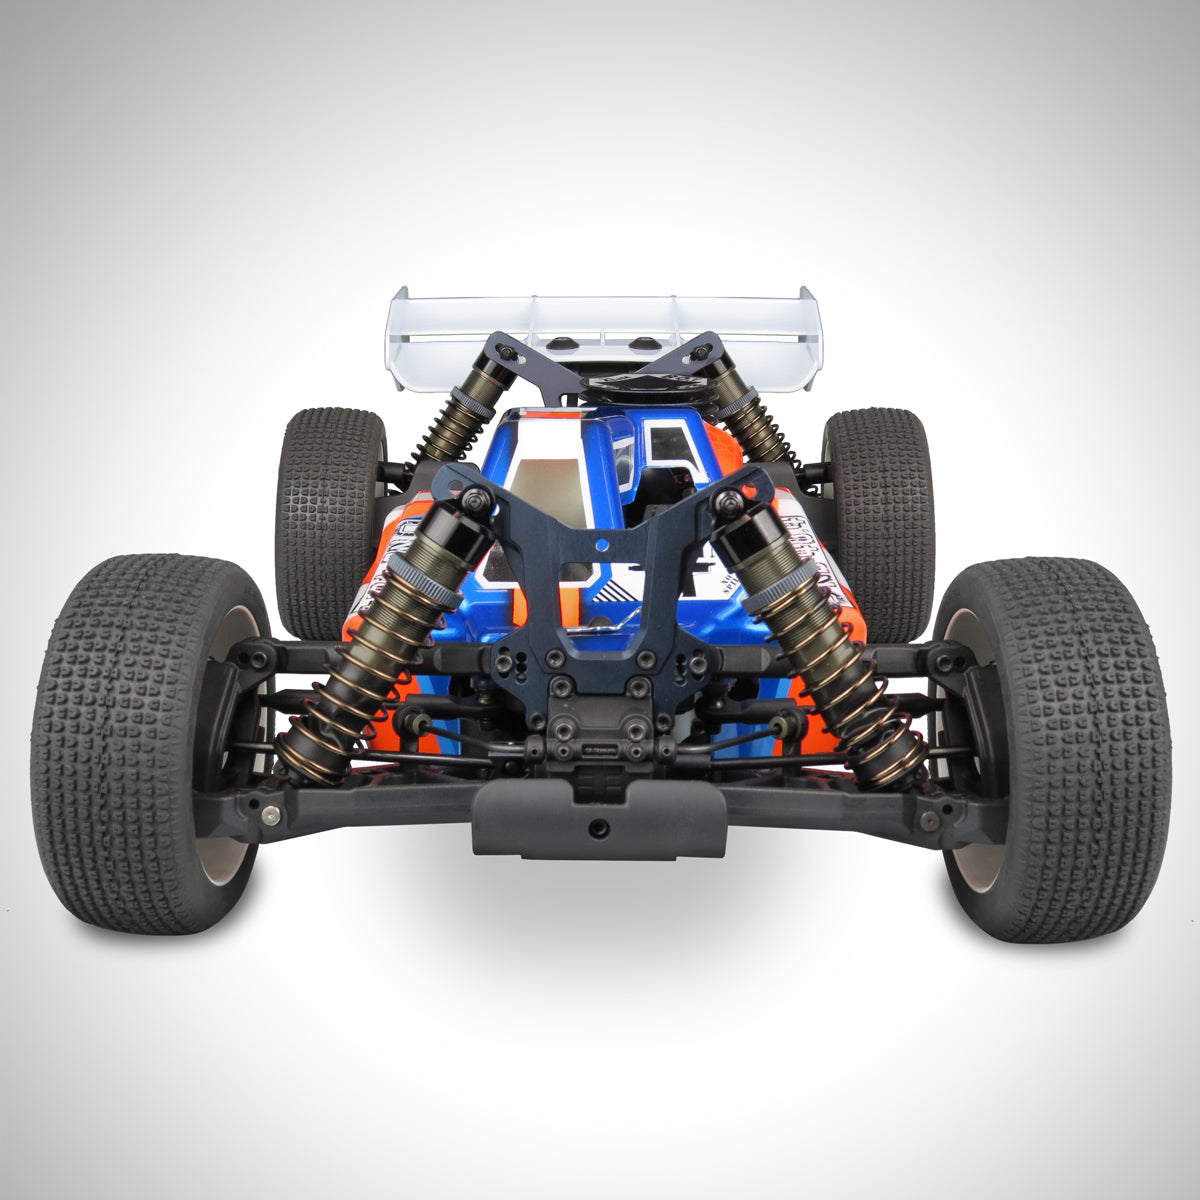 TKR8300 – NB48.4 1/8th 4WD Competition Nitro Buggy Kit - RACERC